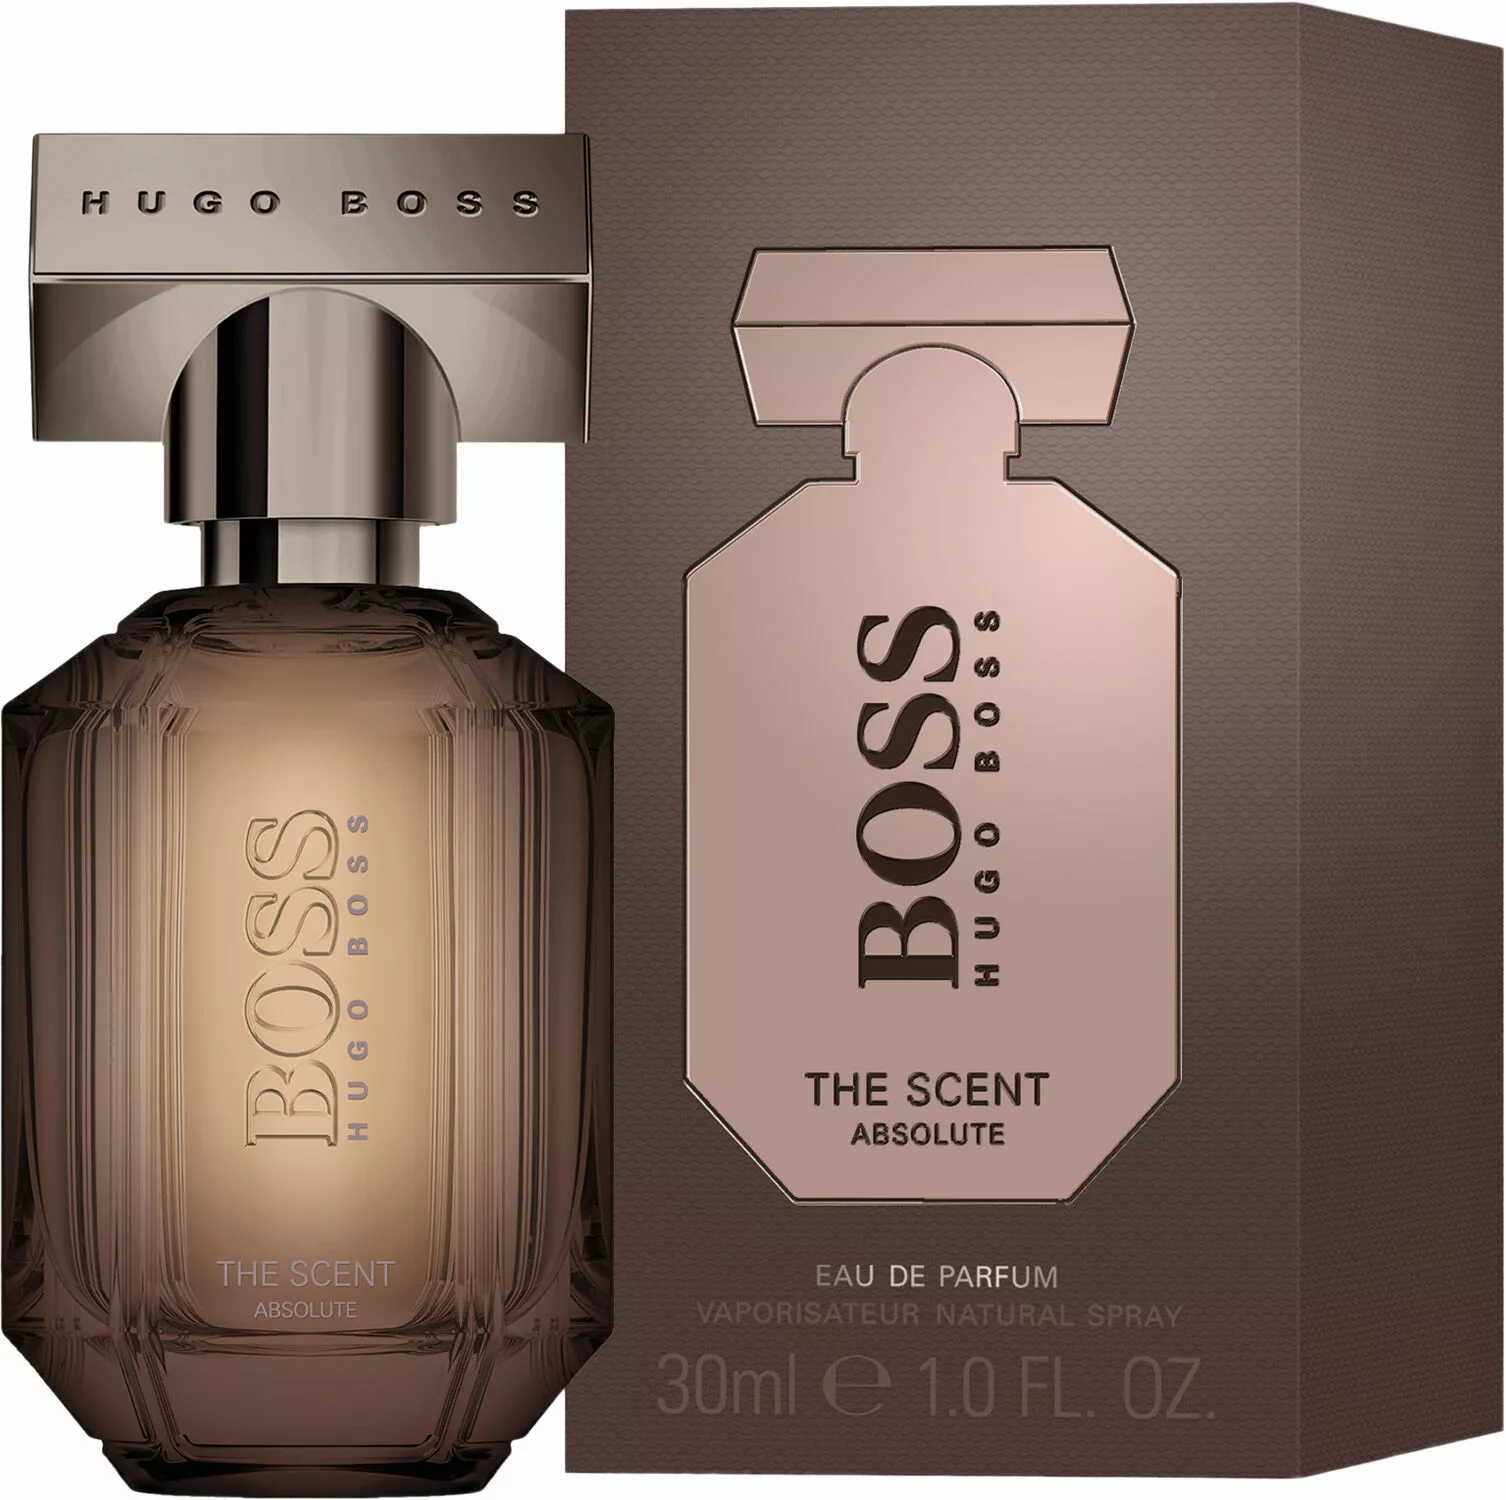 h/hugo boss the scent absolute